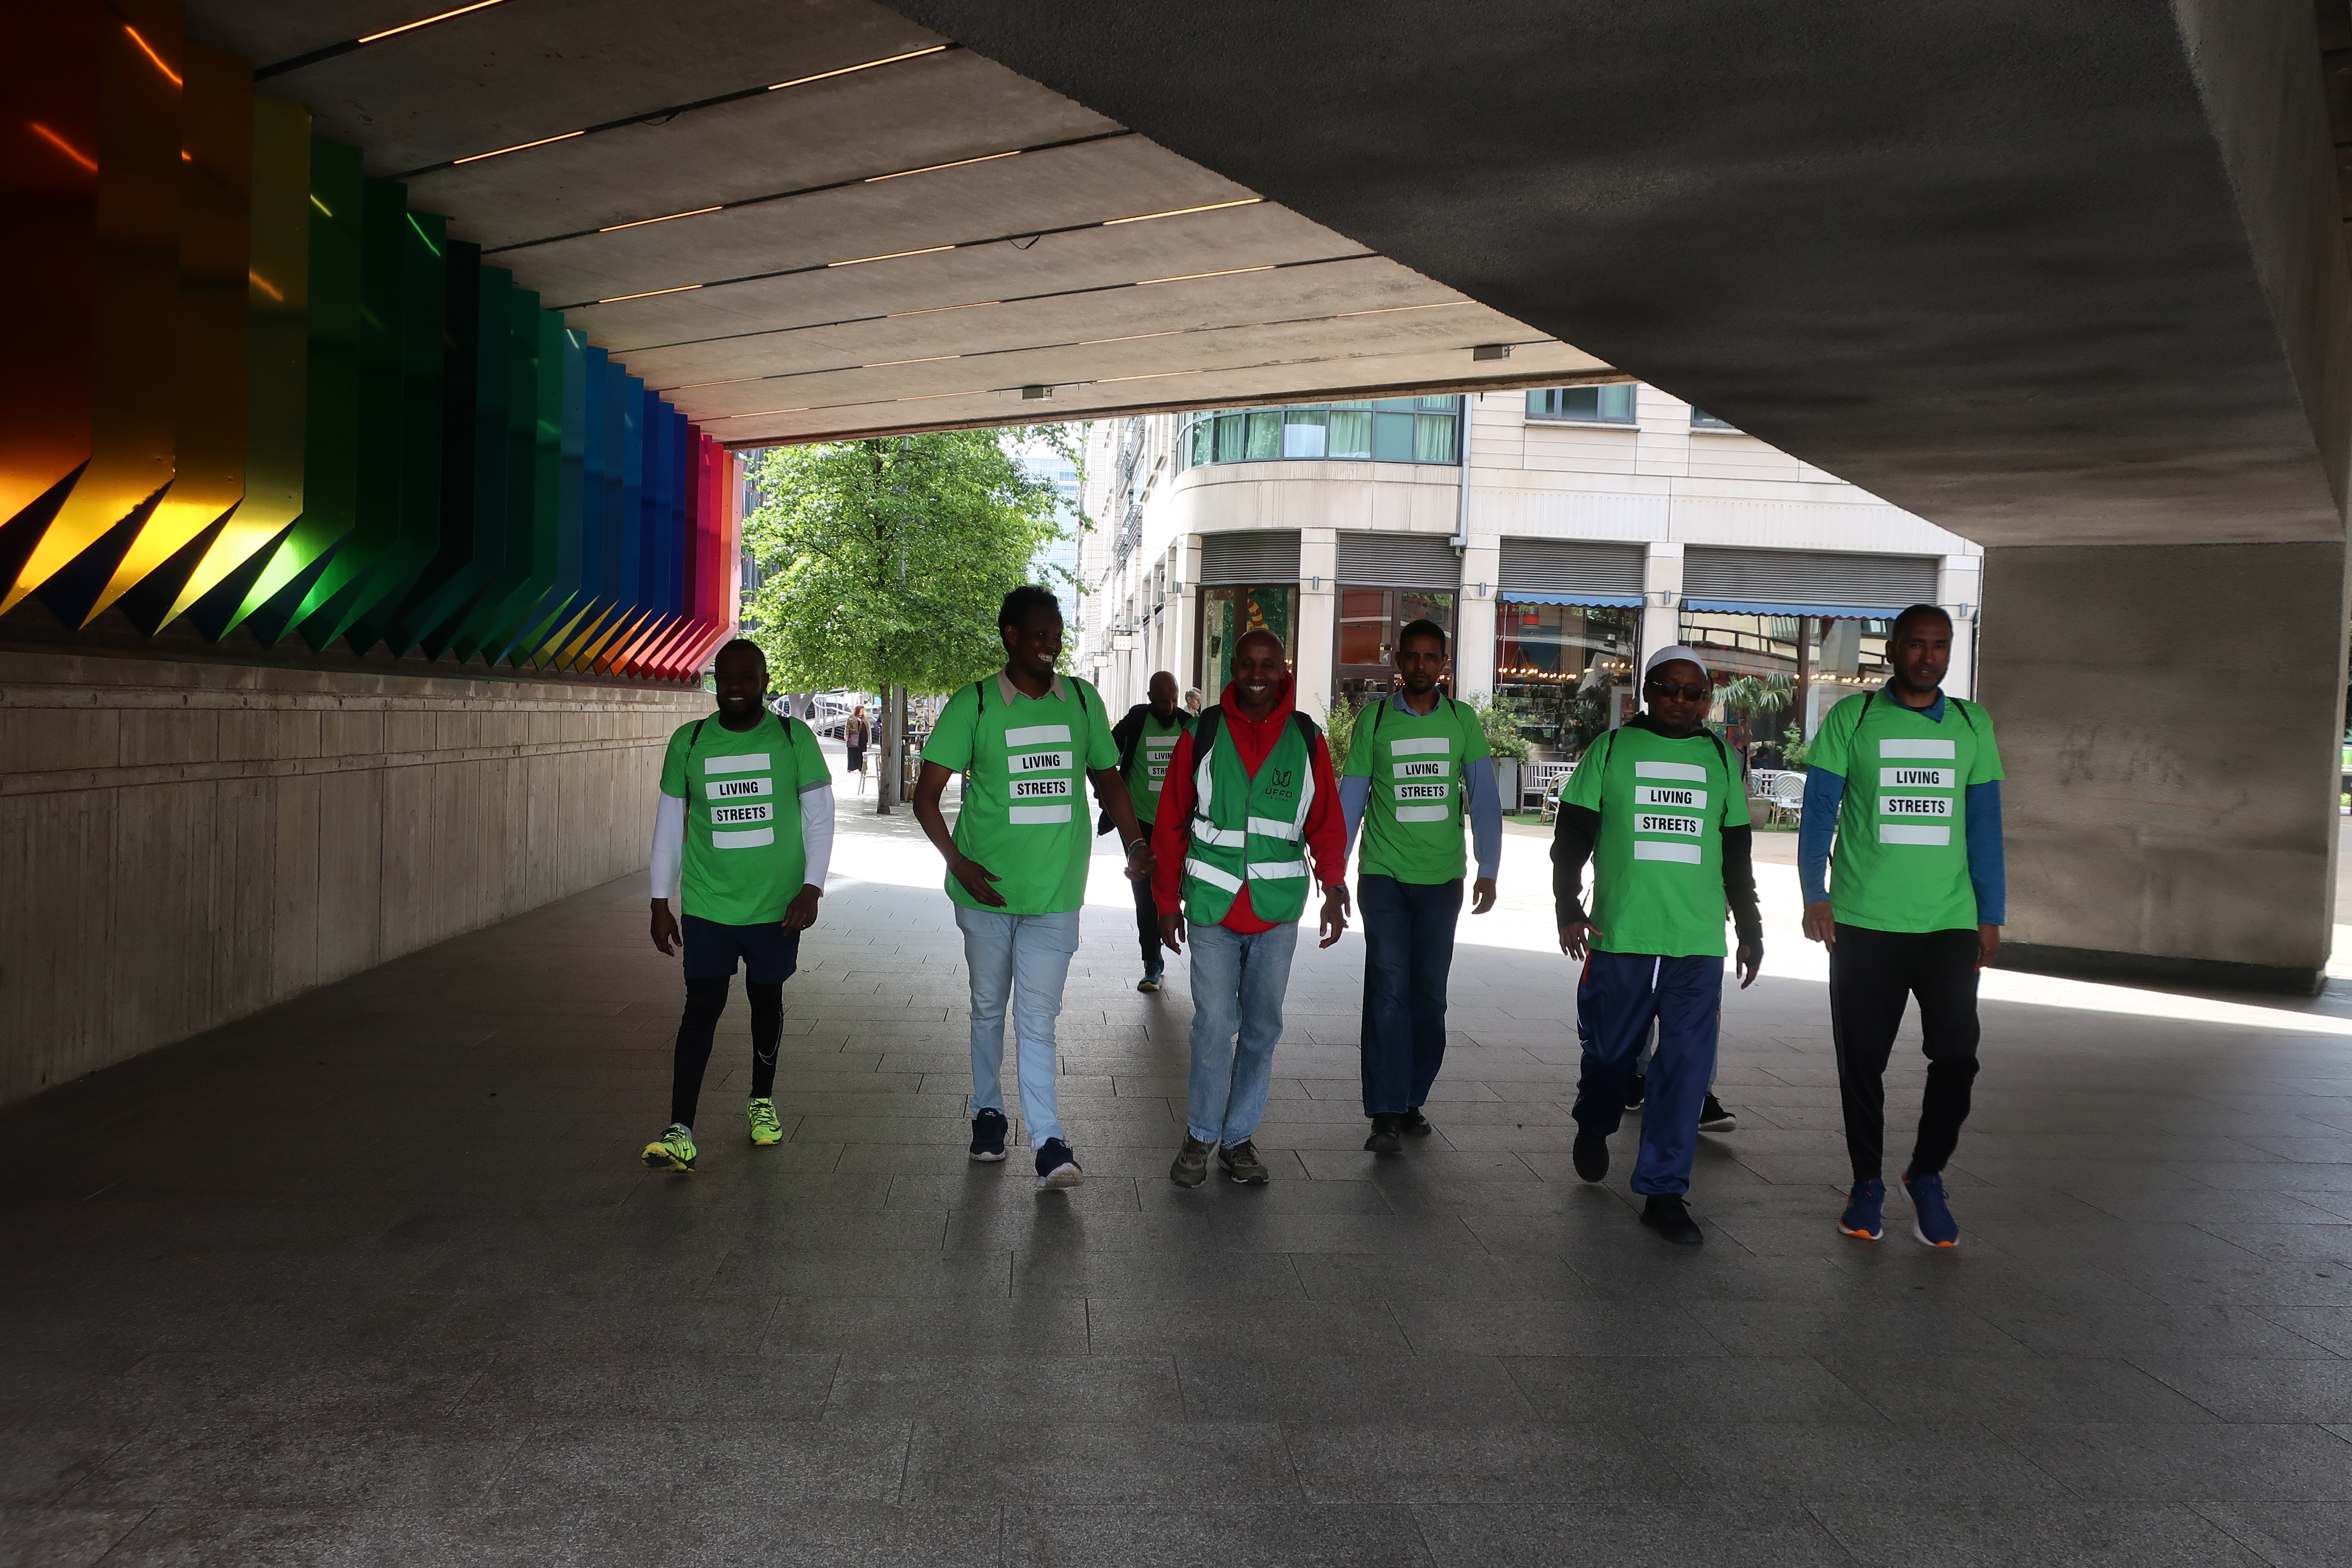 A group of men smiling walk underneath an underpass wearing green living streets tshirtd